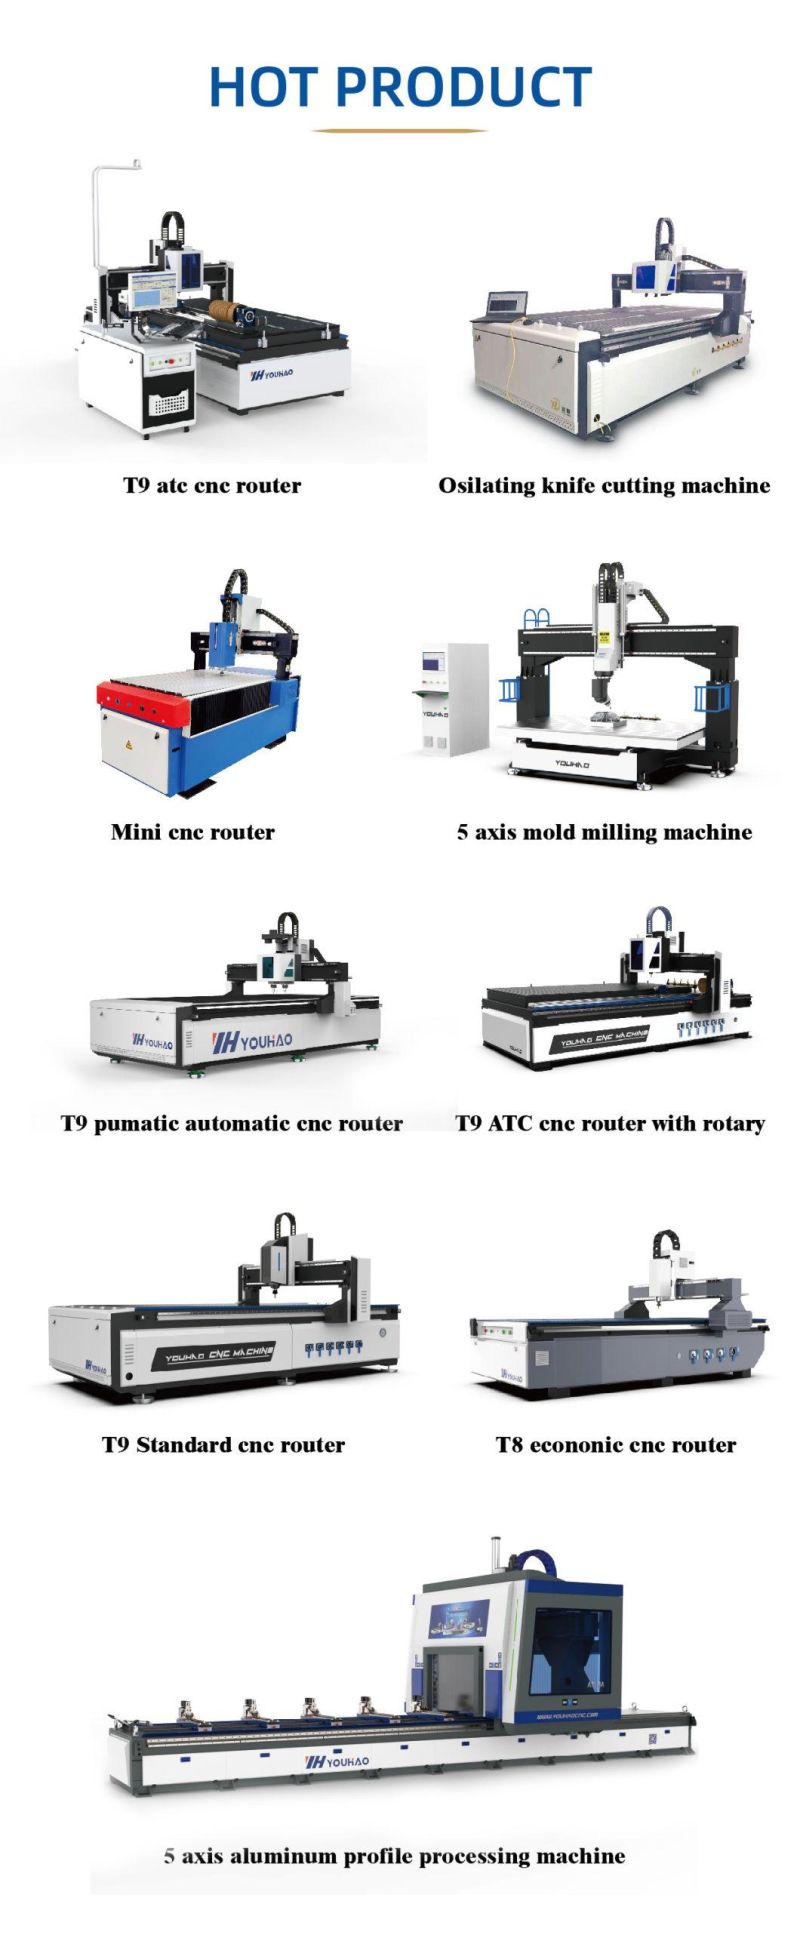 CNC Aluminum Milling Machines Sell Well